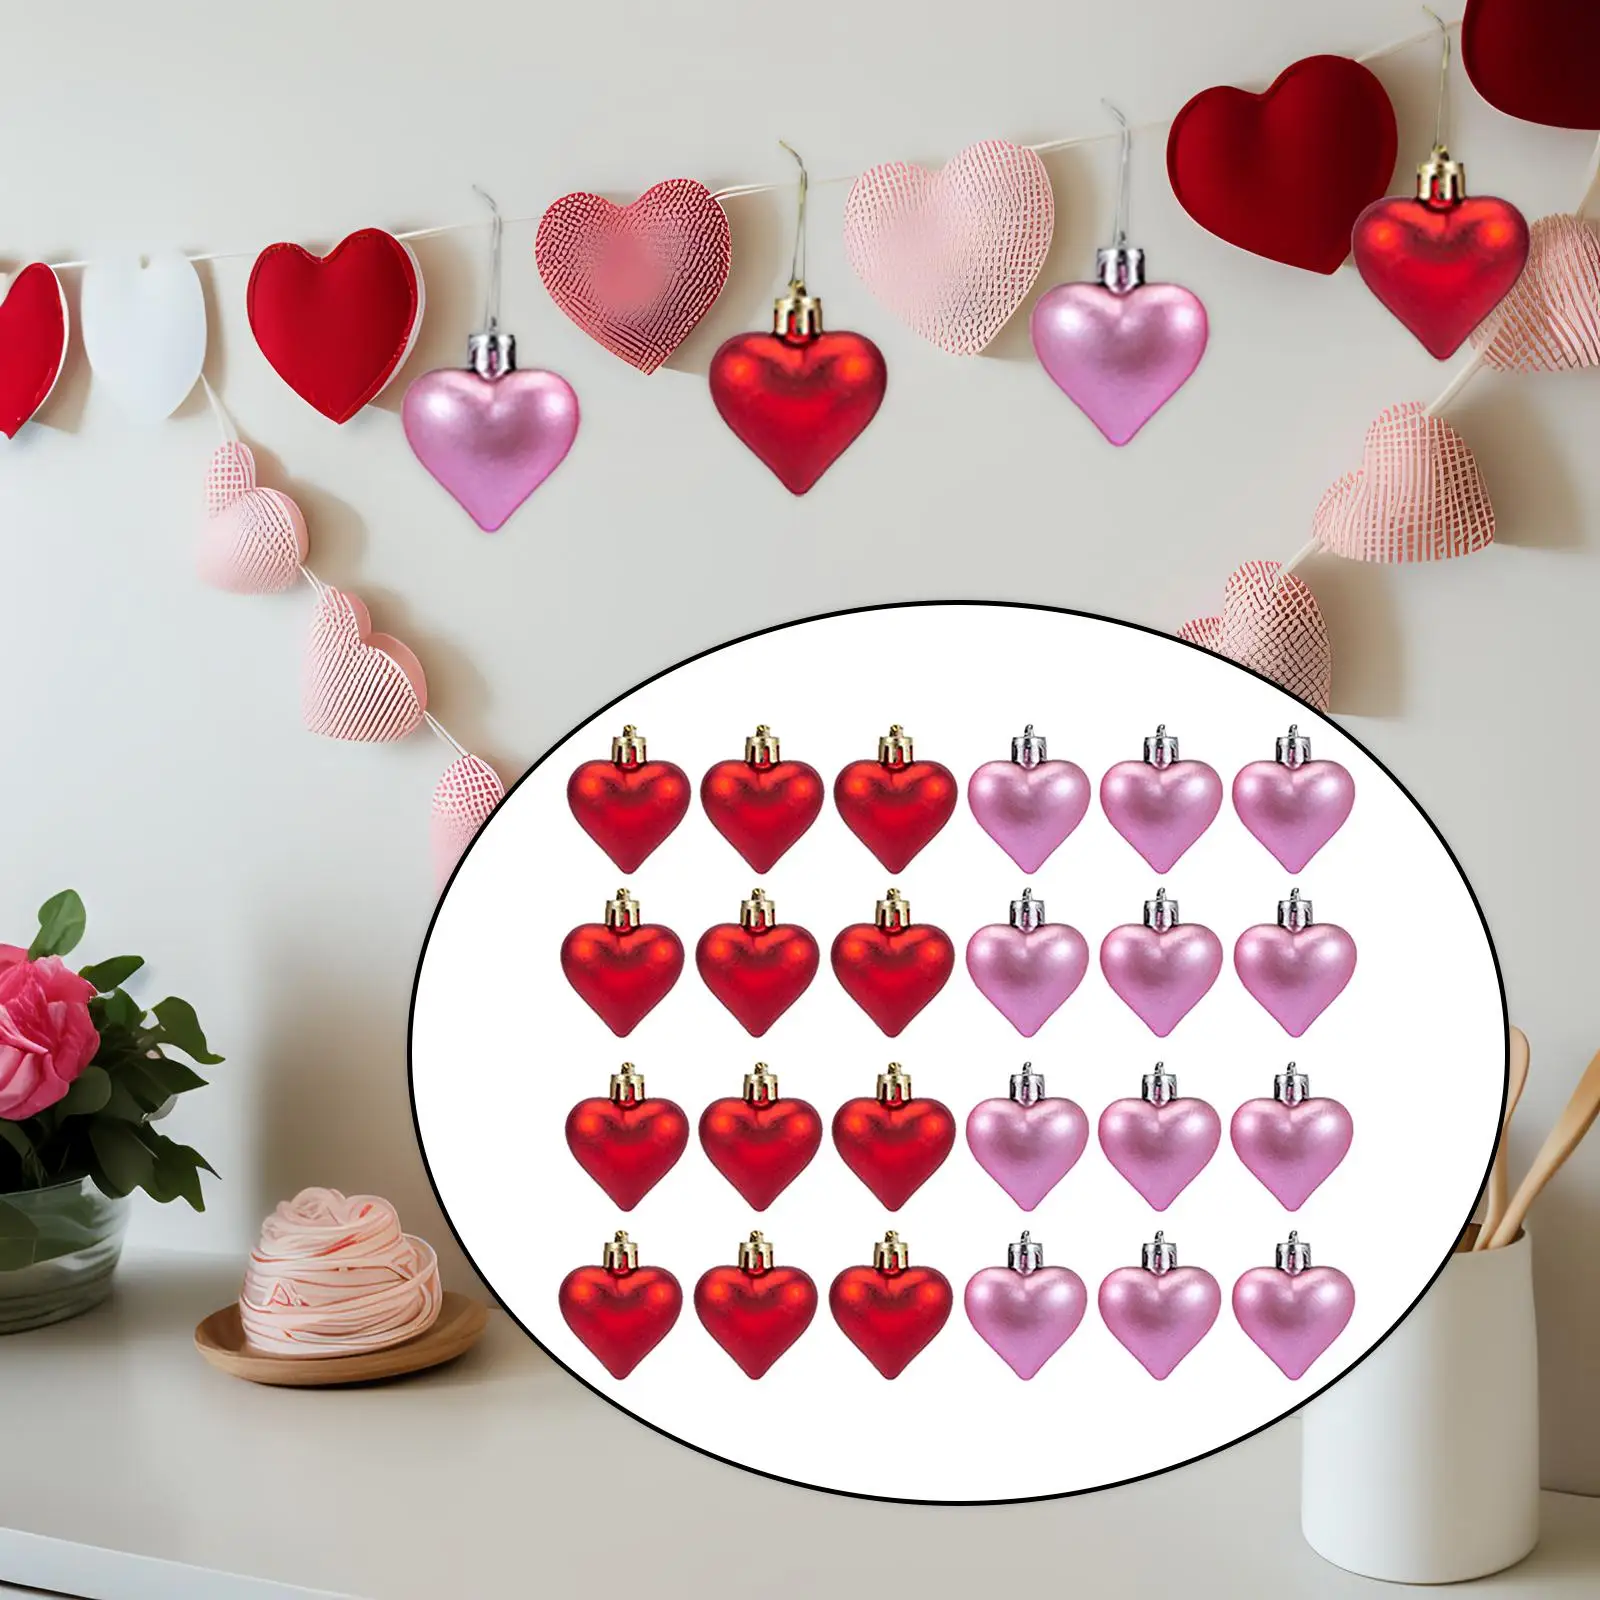 24x Valentine`s Day Heart Ornaments Pendant Romantic Hanging Decorations for Hotel Engagement Home Anniversary Christmas Tree